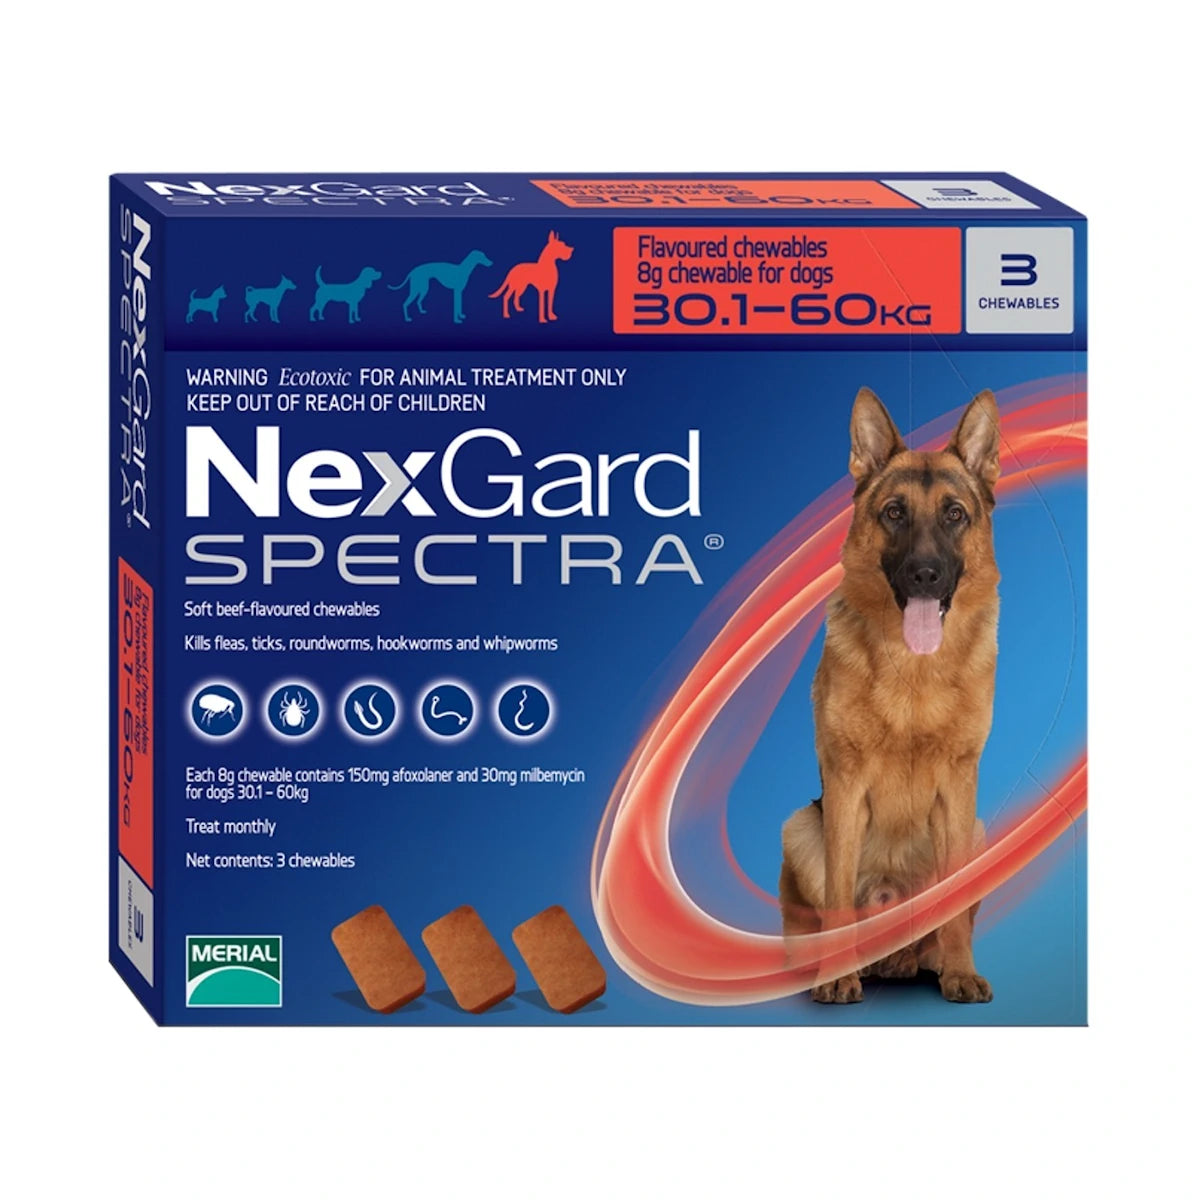 NexGard SPECTRA® Chewable Tablets for Extra Large Dogs (30kg-60kg)